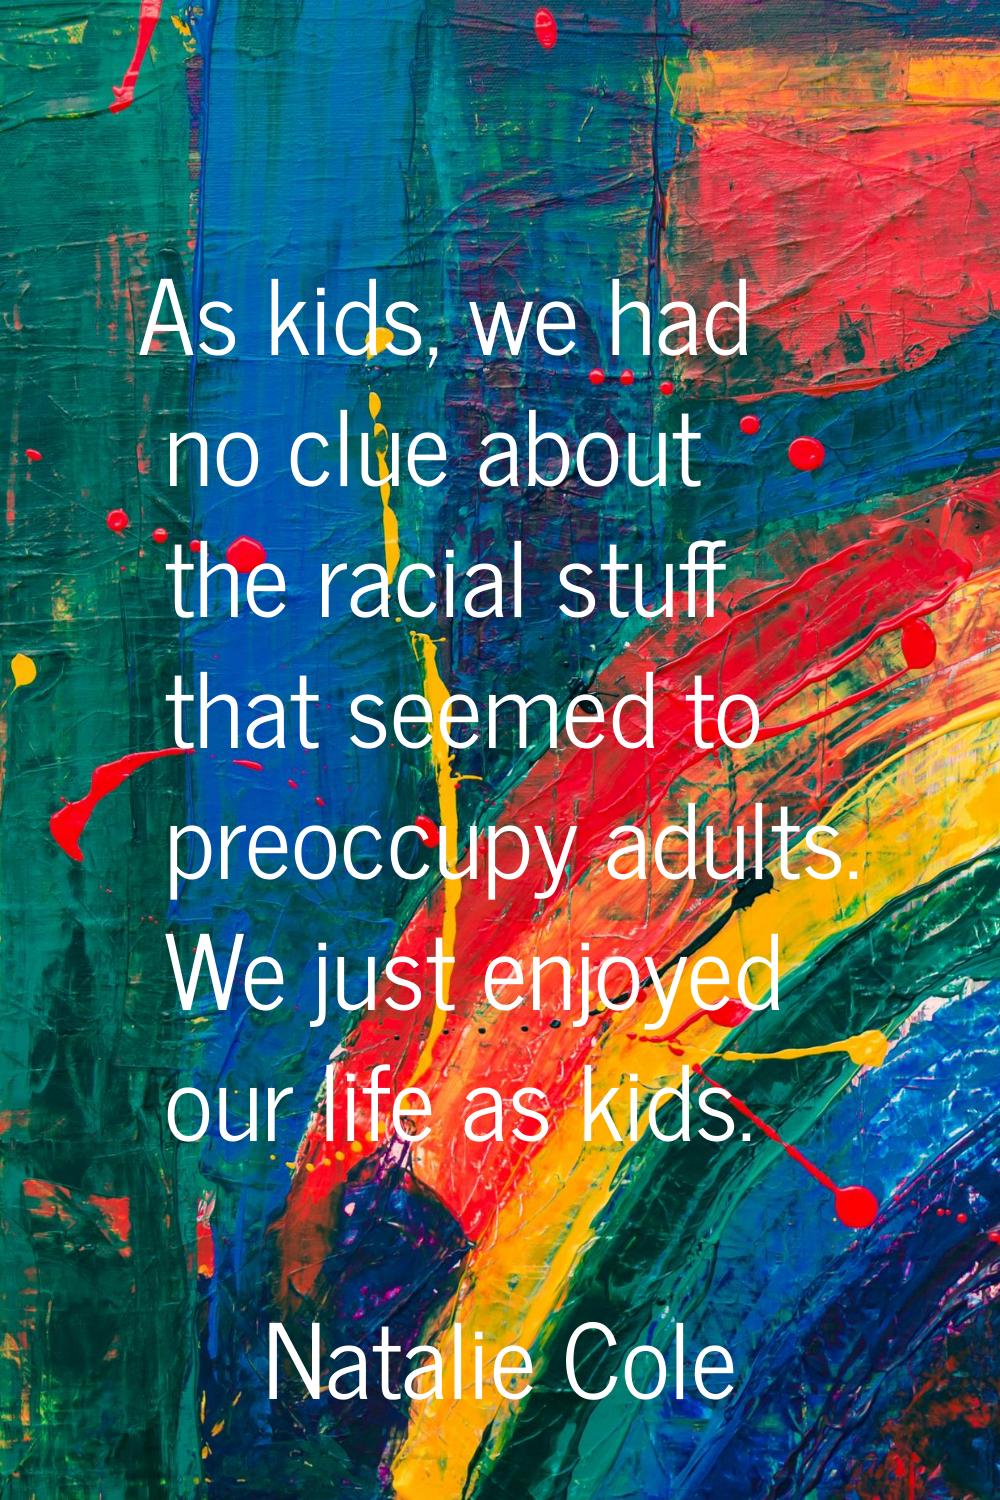 As kids, we had no clue about the racial stuff that seemed to preoccupy adults. We just enjoyed our